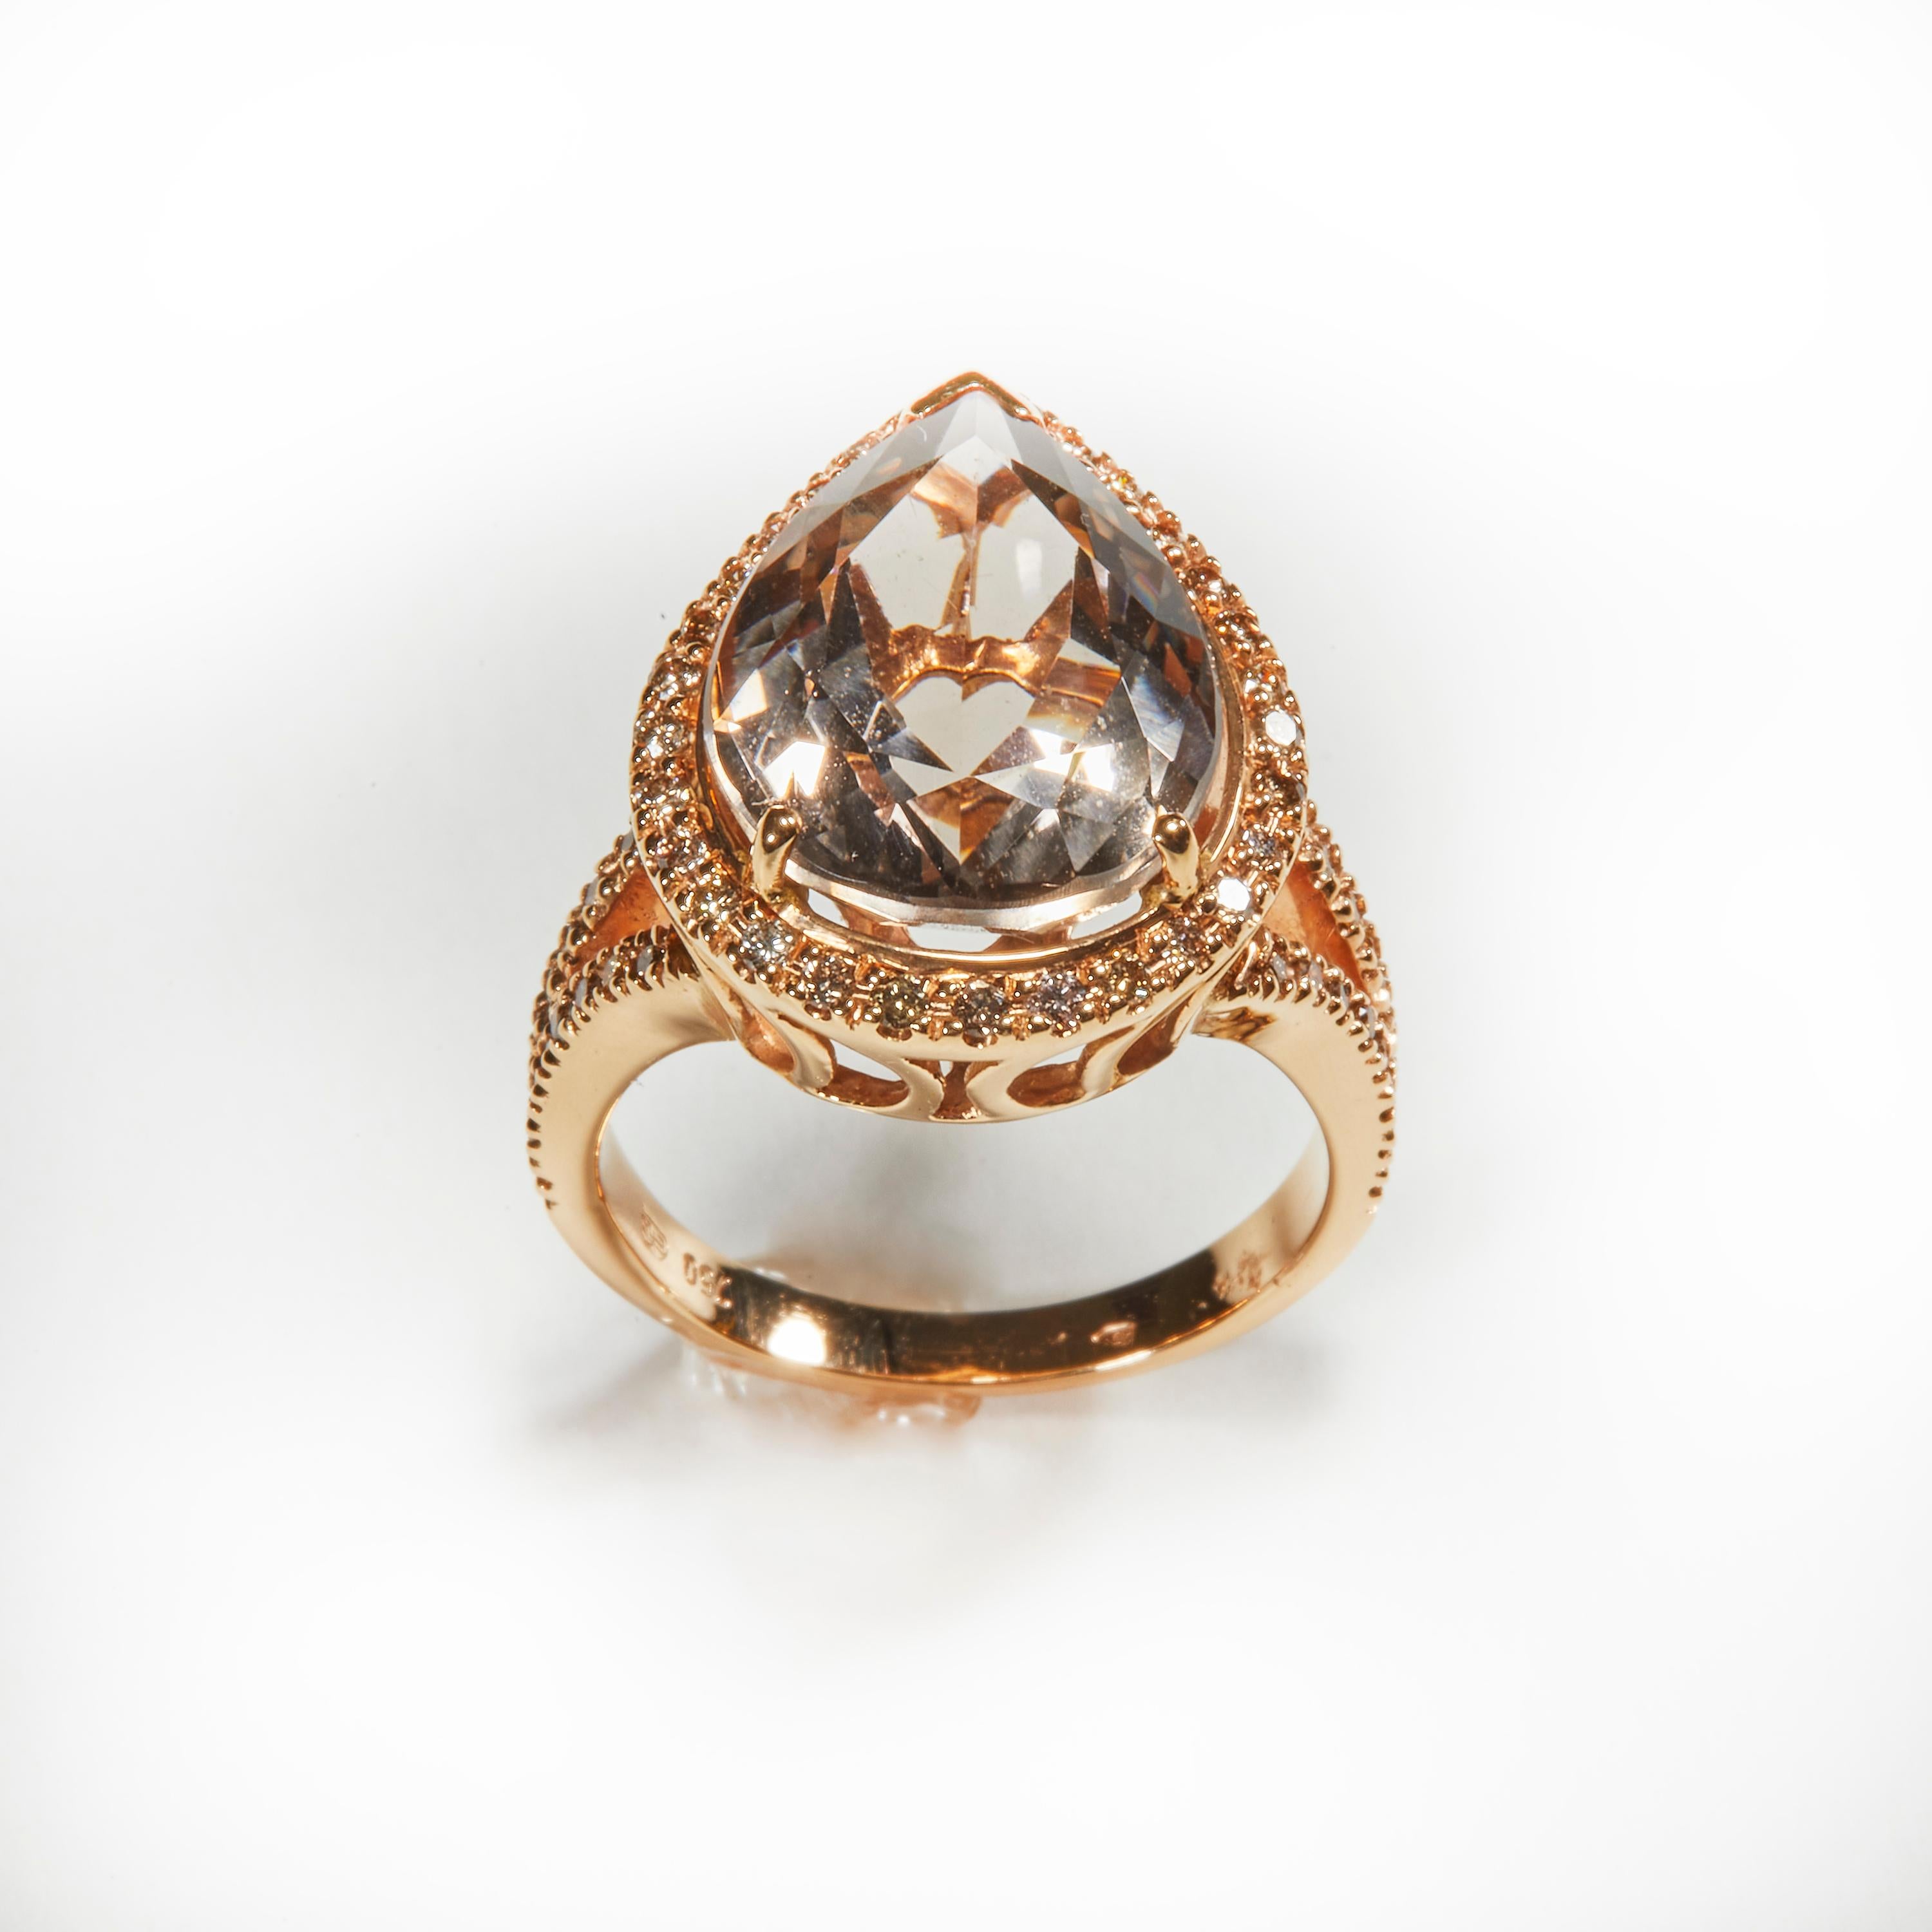 18 Karat Rose Gold Cognac Diamond and Smoky Quartz  Cocktail Ring

62 Cognac Diamonds 0,52 Carat
1  Smoky Quarz 8,18 Carat

Size EU 54 US 7


Founded in 1974, Gianni Lazzaro is a family-owned jewelery company based out of Düsseldorf,